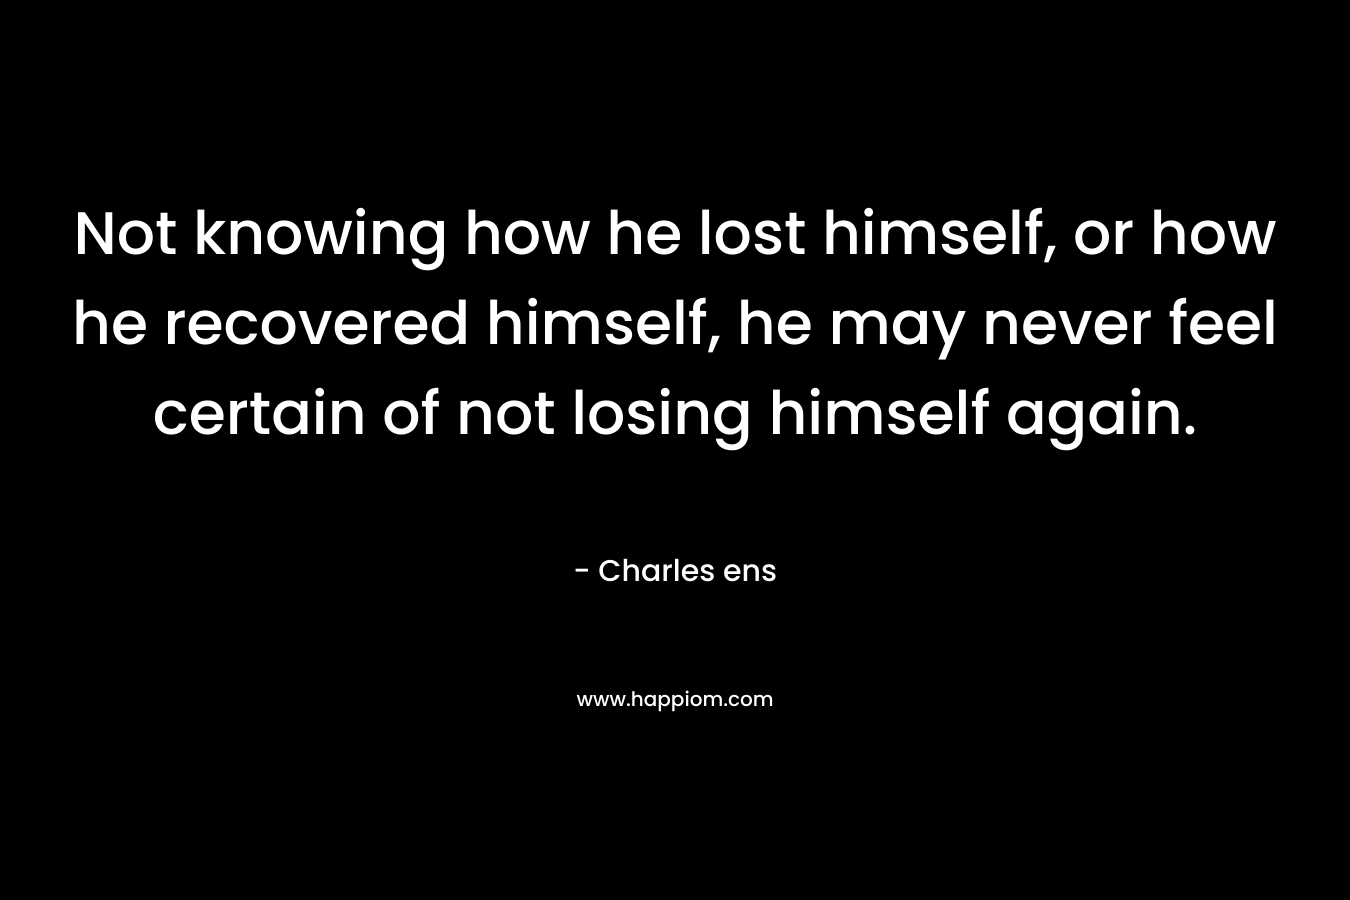 Not knowing how he lost himself, or how he recovered himself, he may never feel certain of not losing himself again.